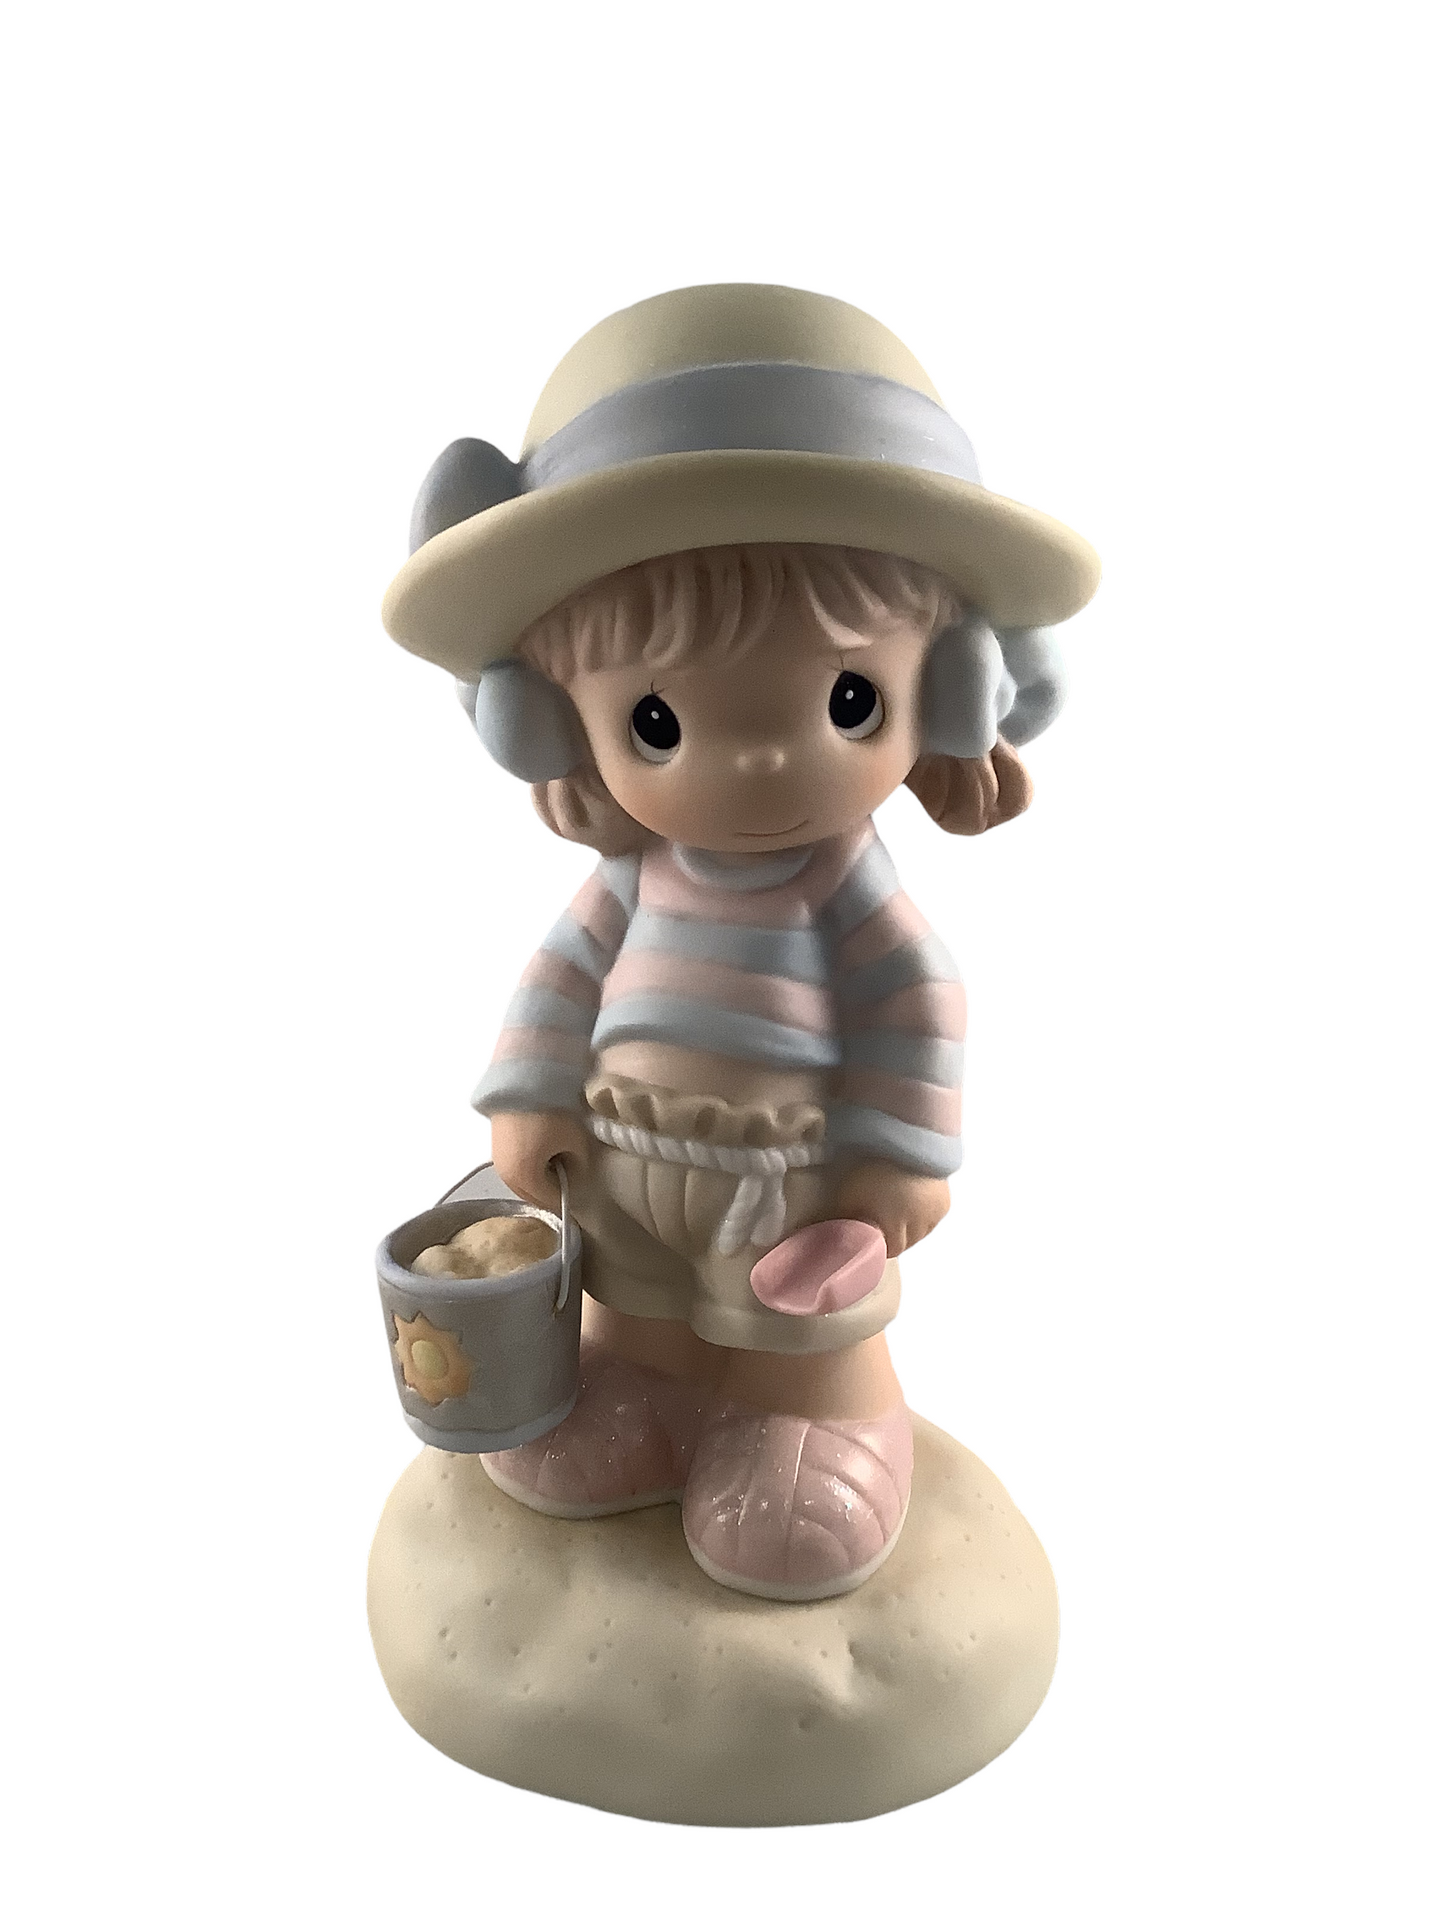 Others Pail In Comparison To You - Precious Moment Figurine